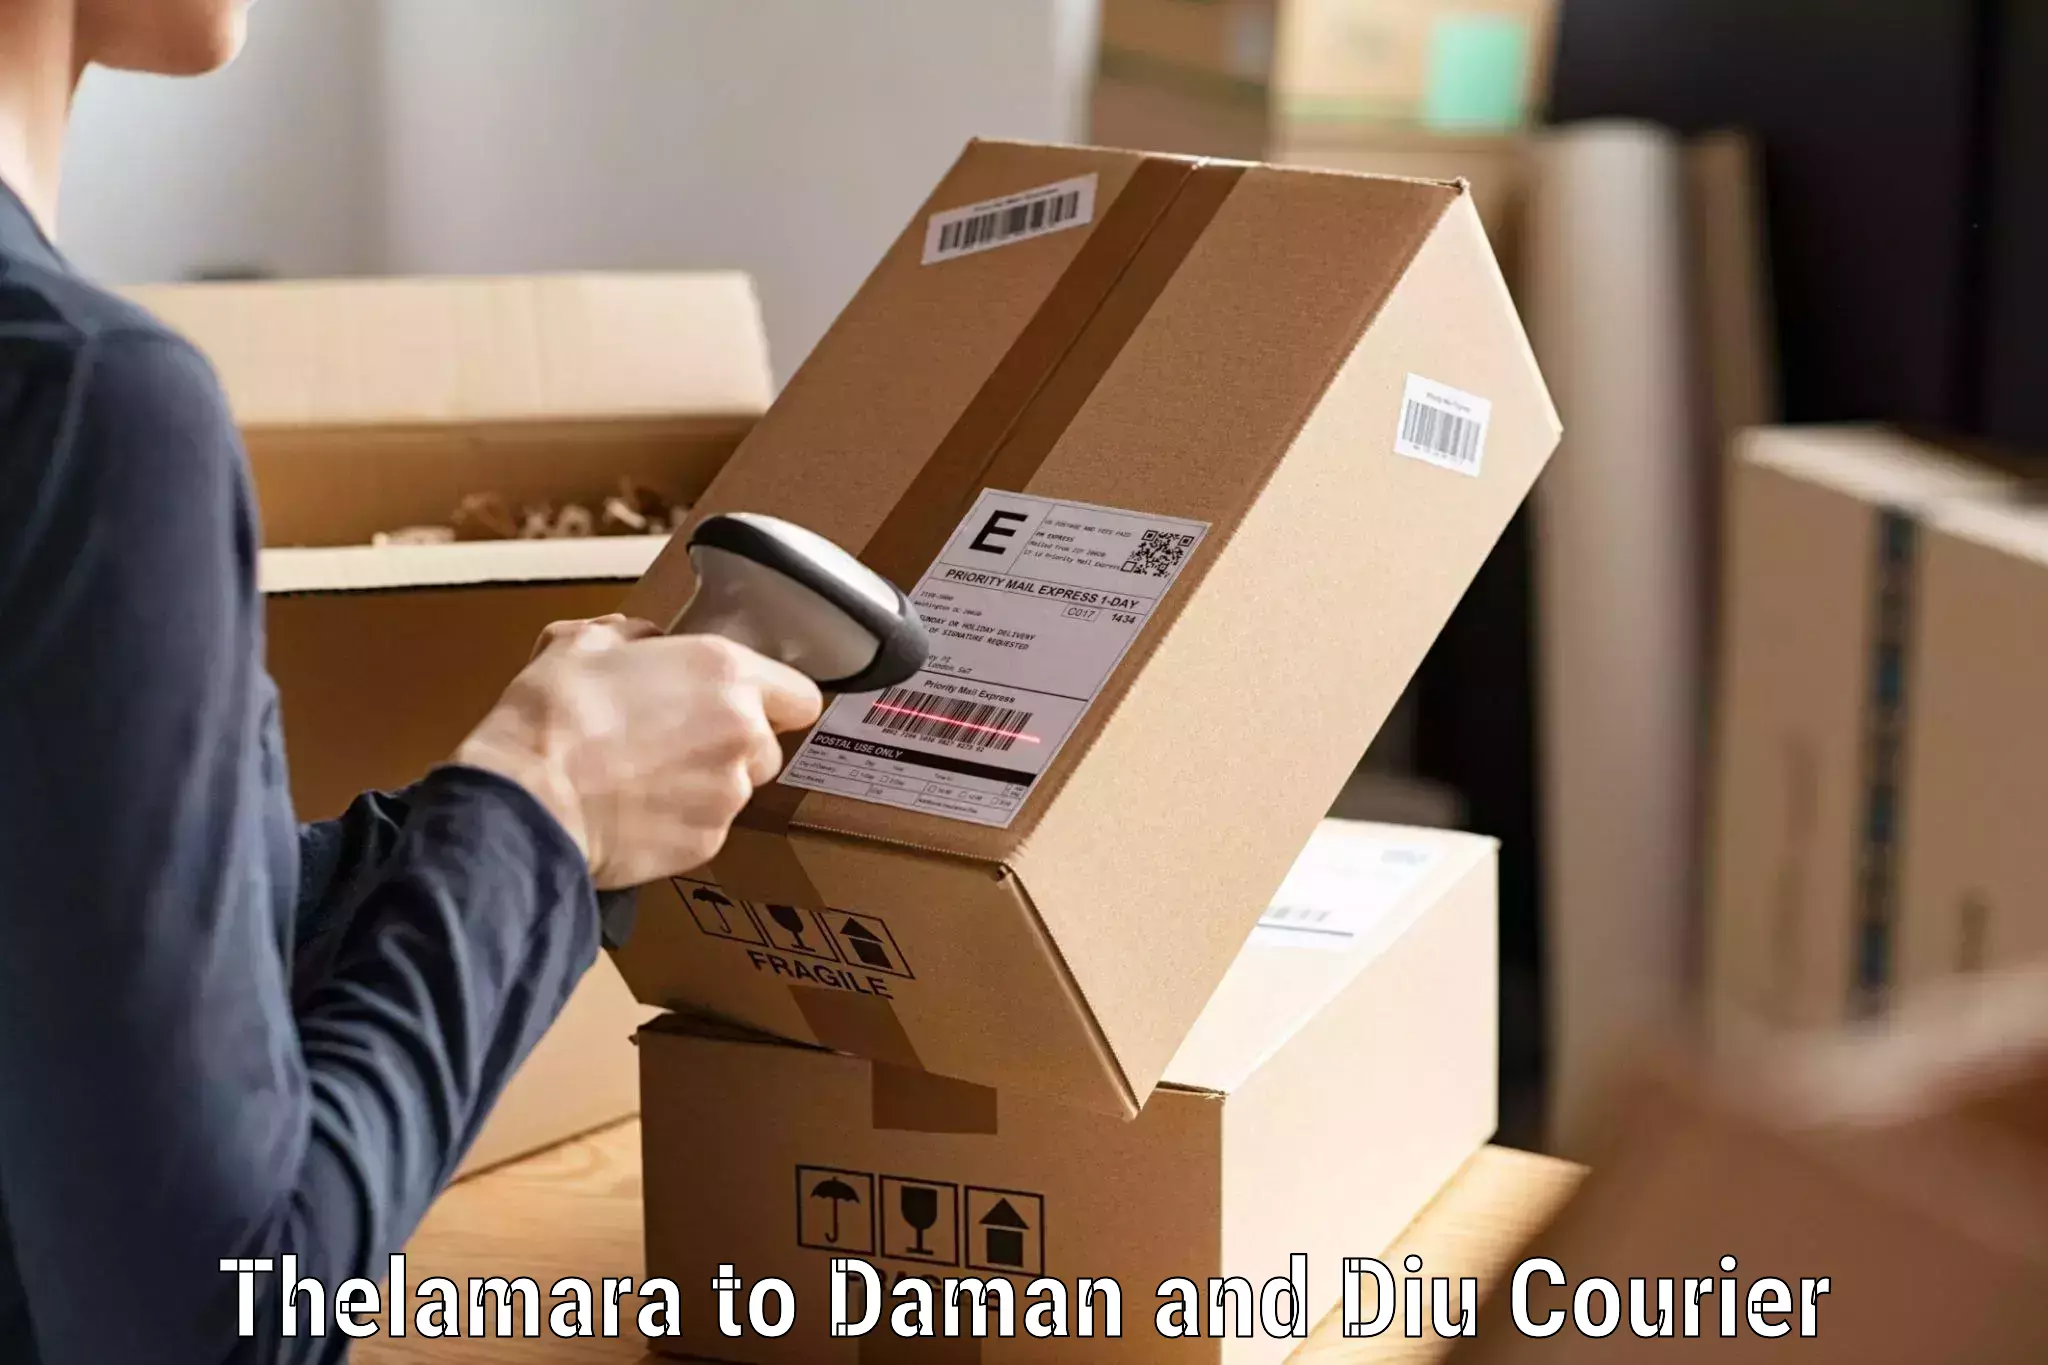 Personal parcel delivery Thelamara to Daman